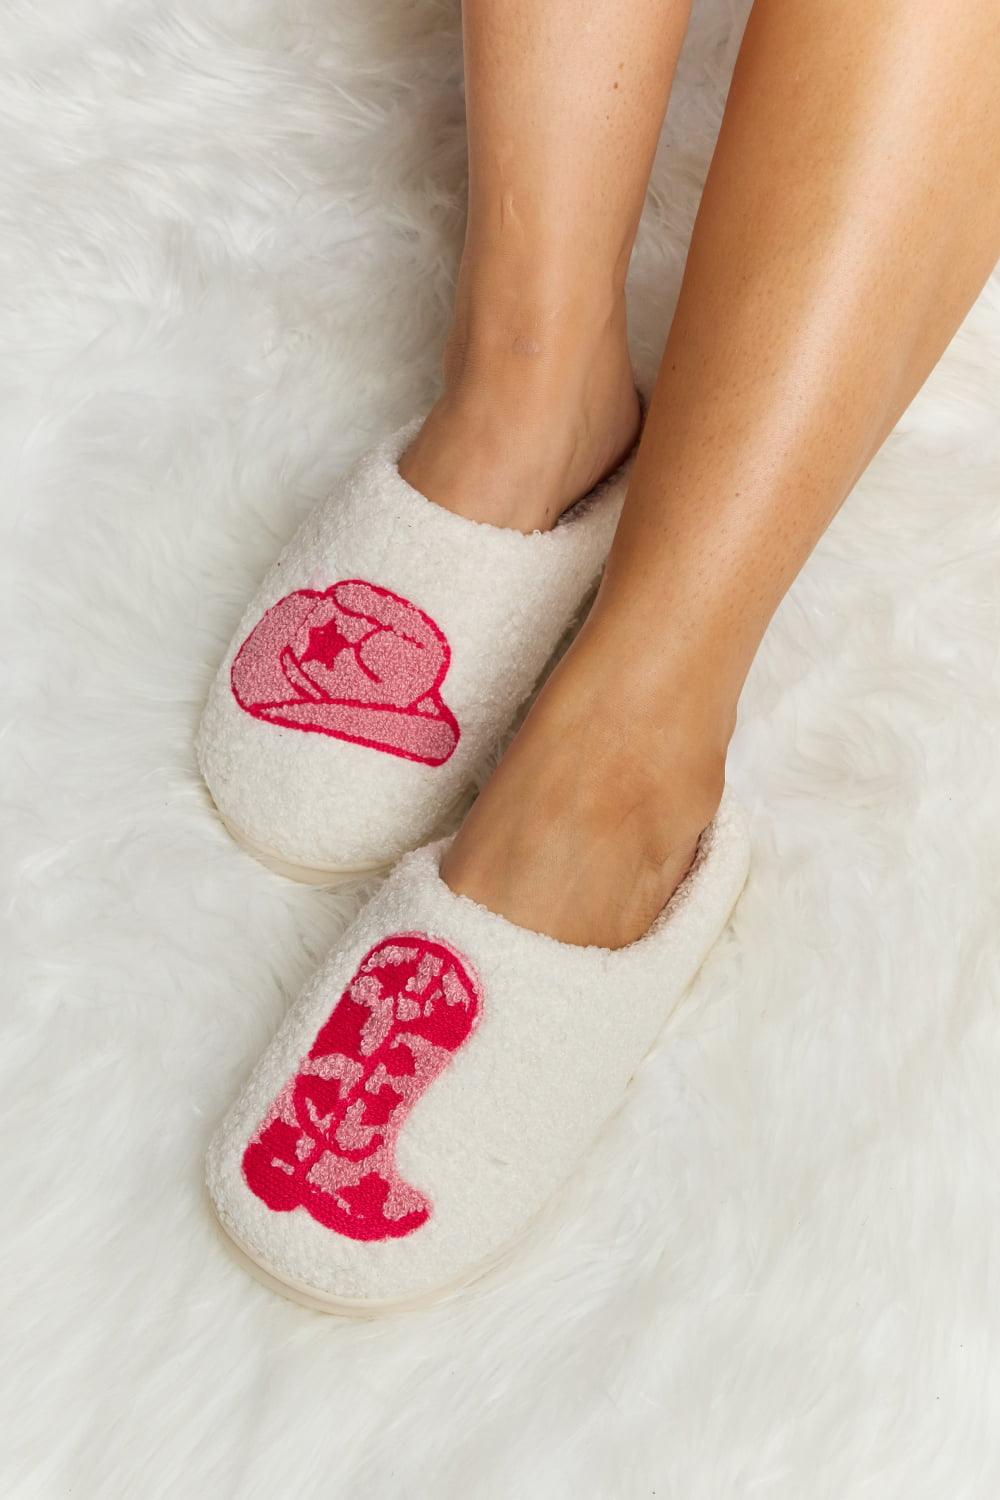 Women's Shoes - Slippers Melody Printed Plush Slide Slippers